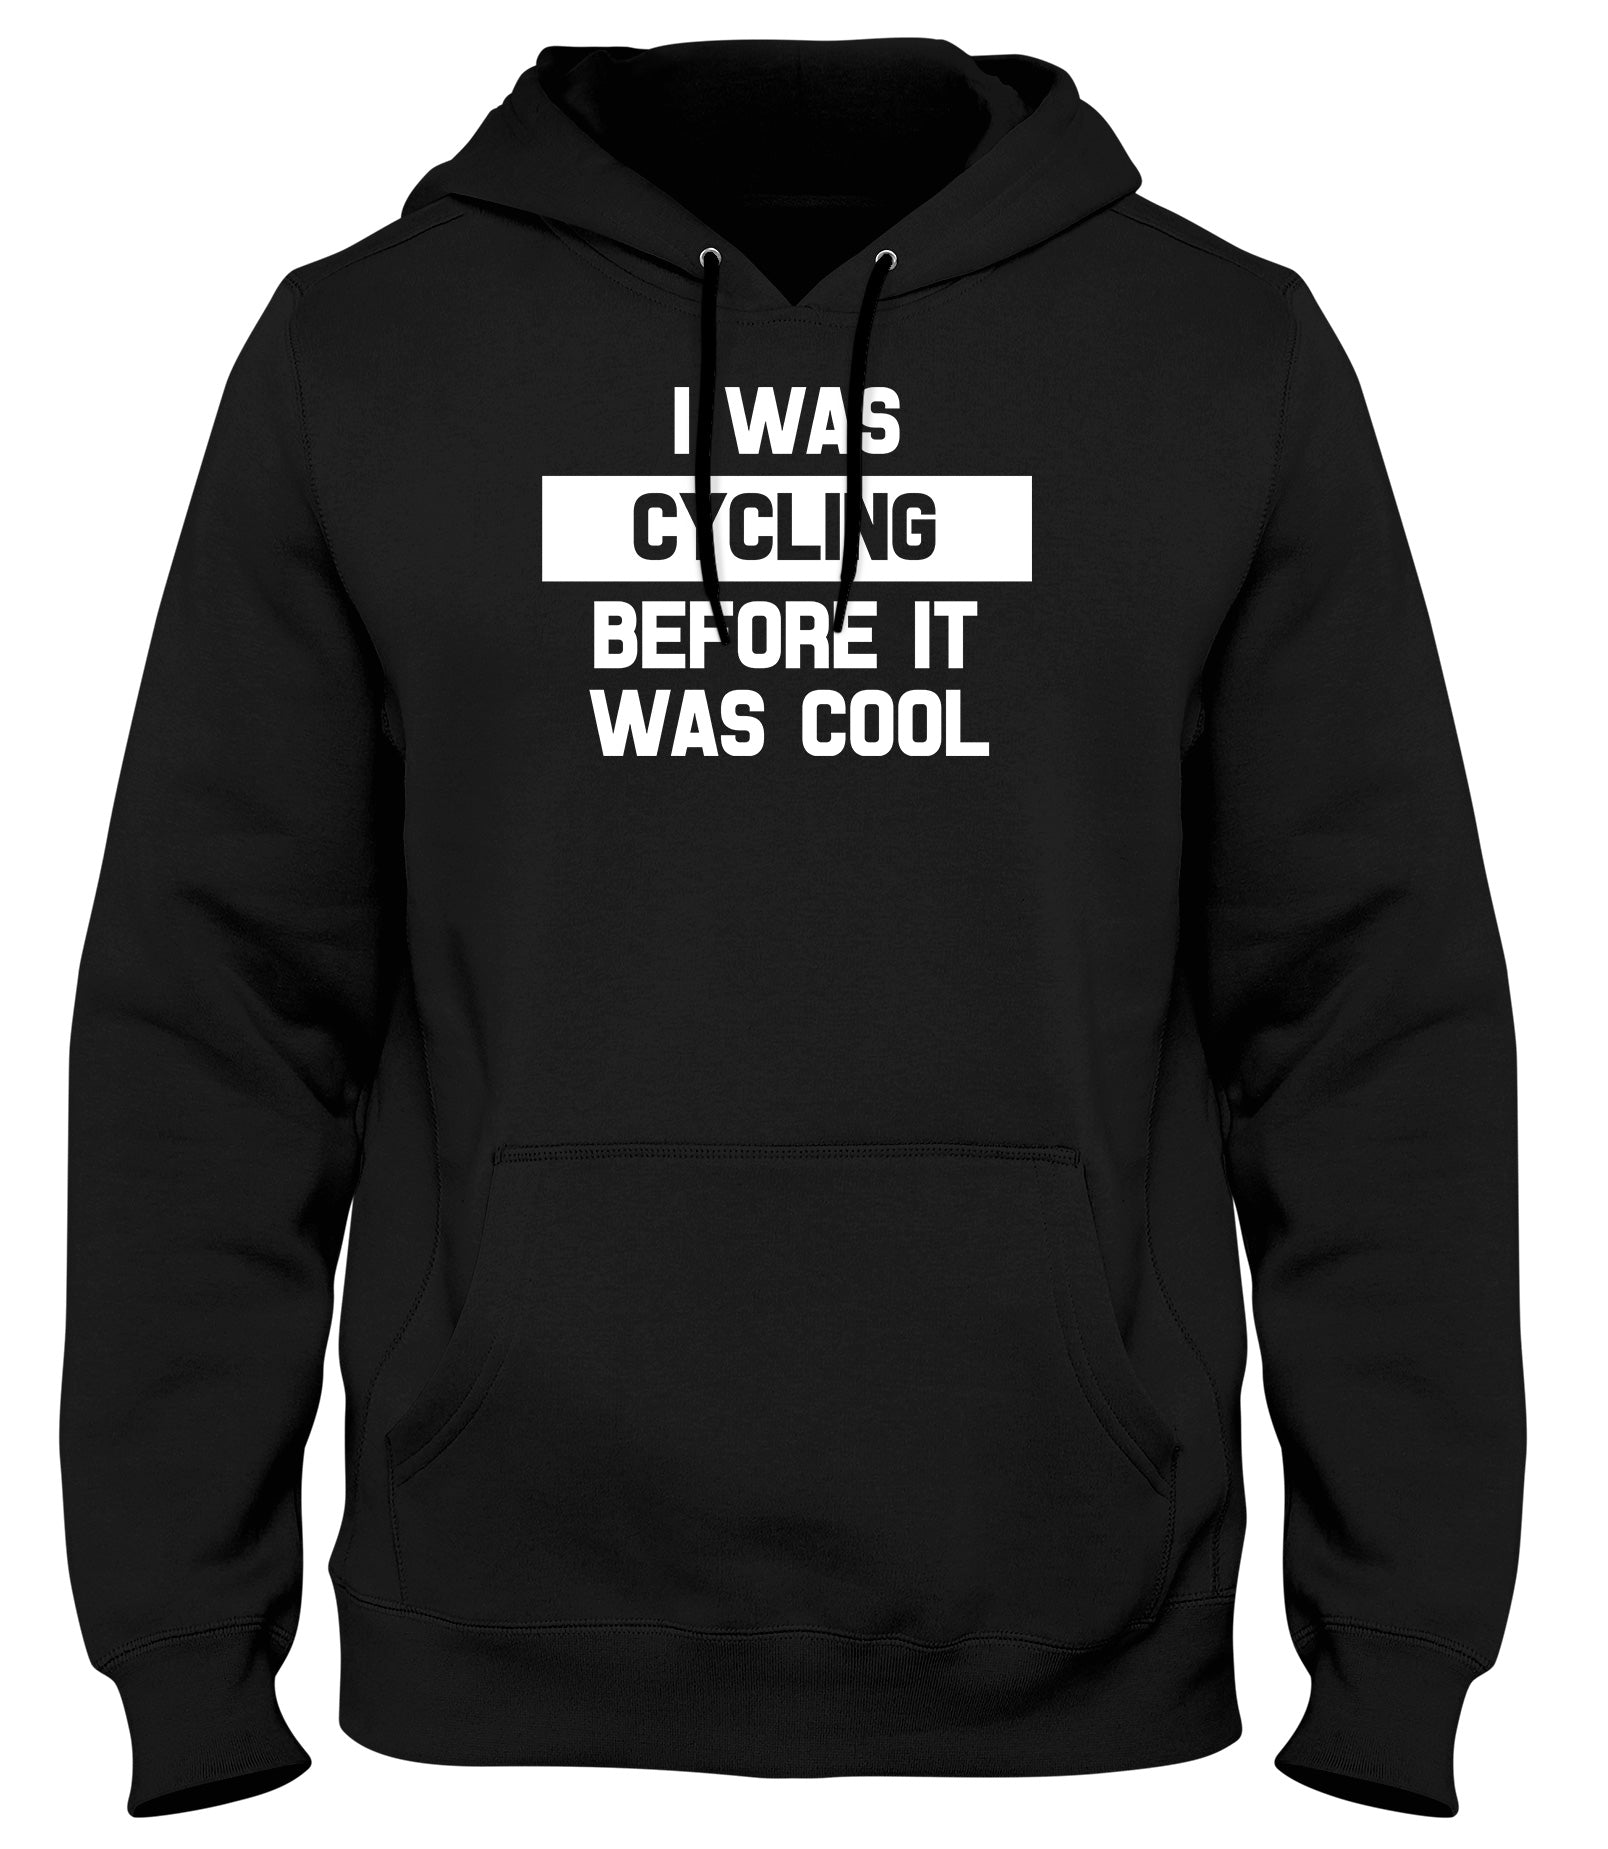 I WAS CYCLING BEFORE IT WAS COOL WOMENS LADIES MENS UNISEX HOODIE